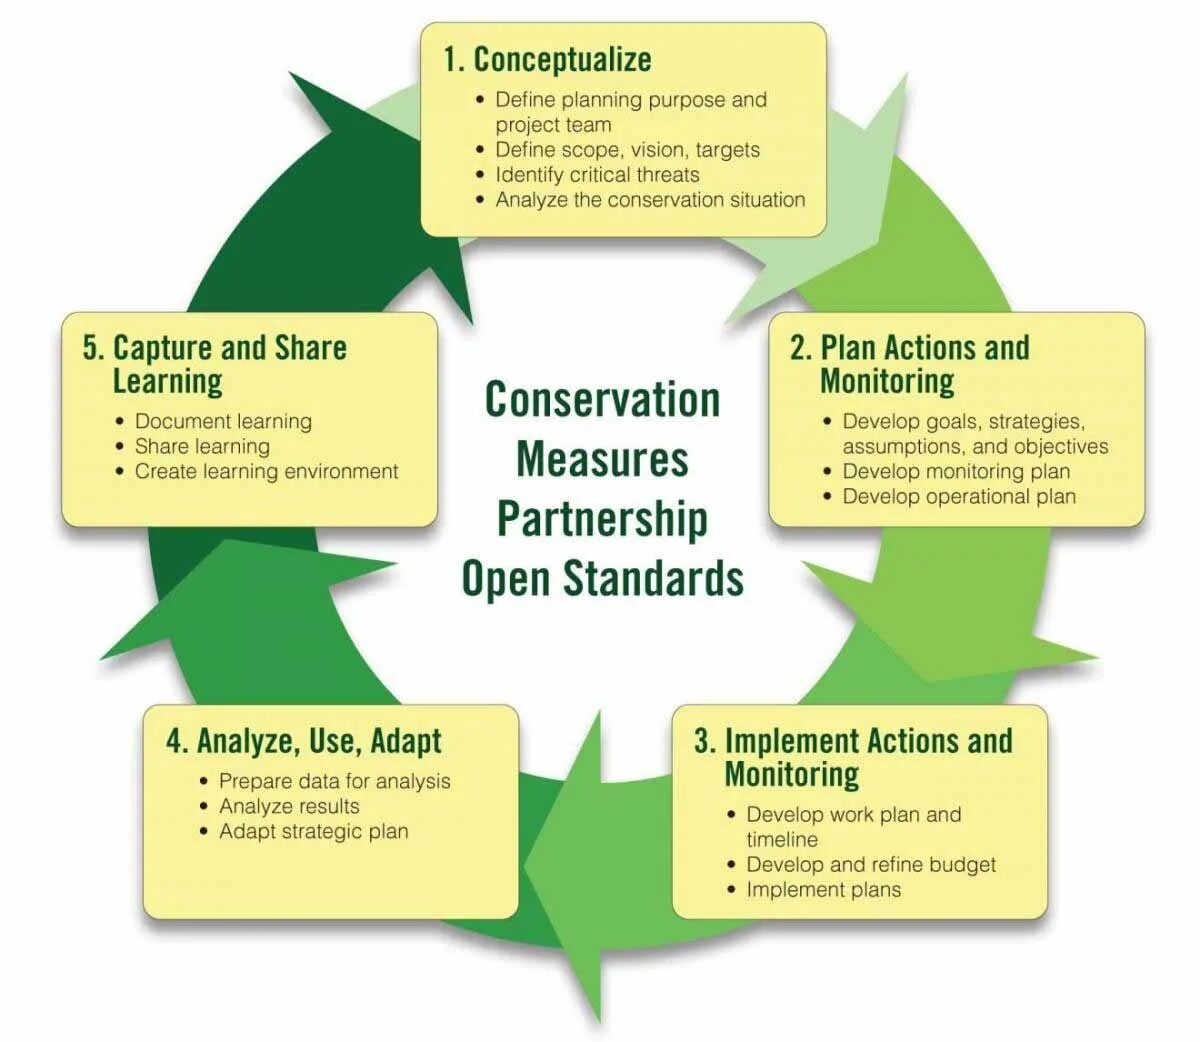 Planning Definition. Developing the Plan фото. Conservation objectives. Open partnership. Implement plan